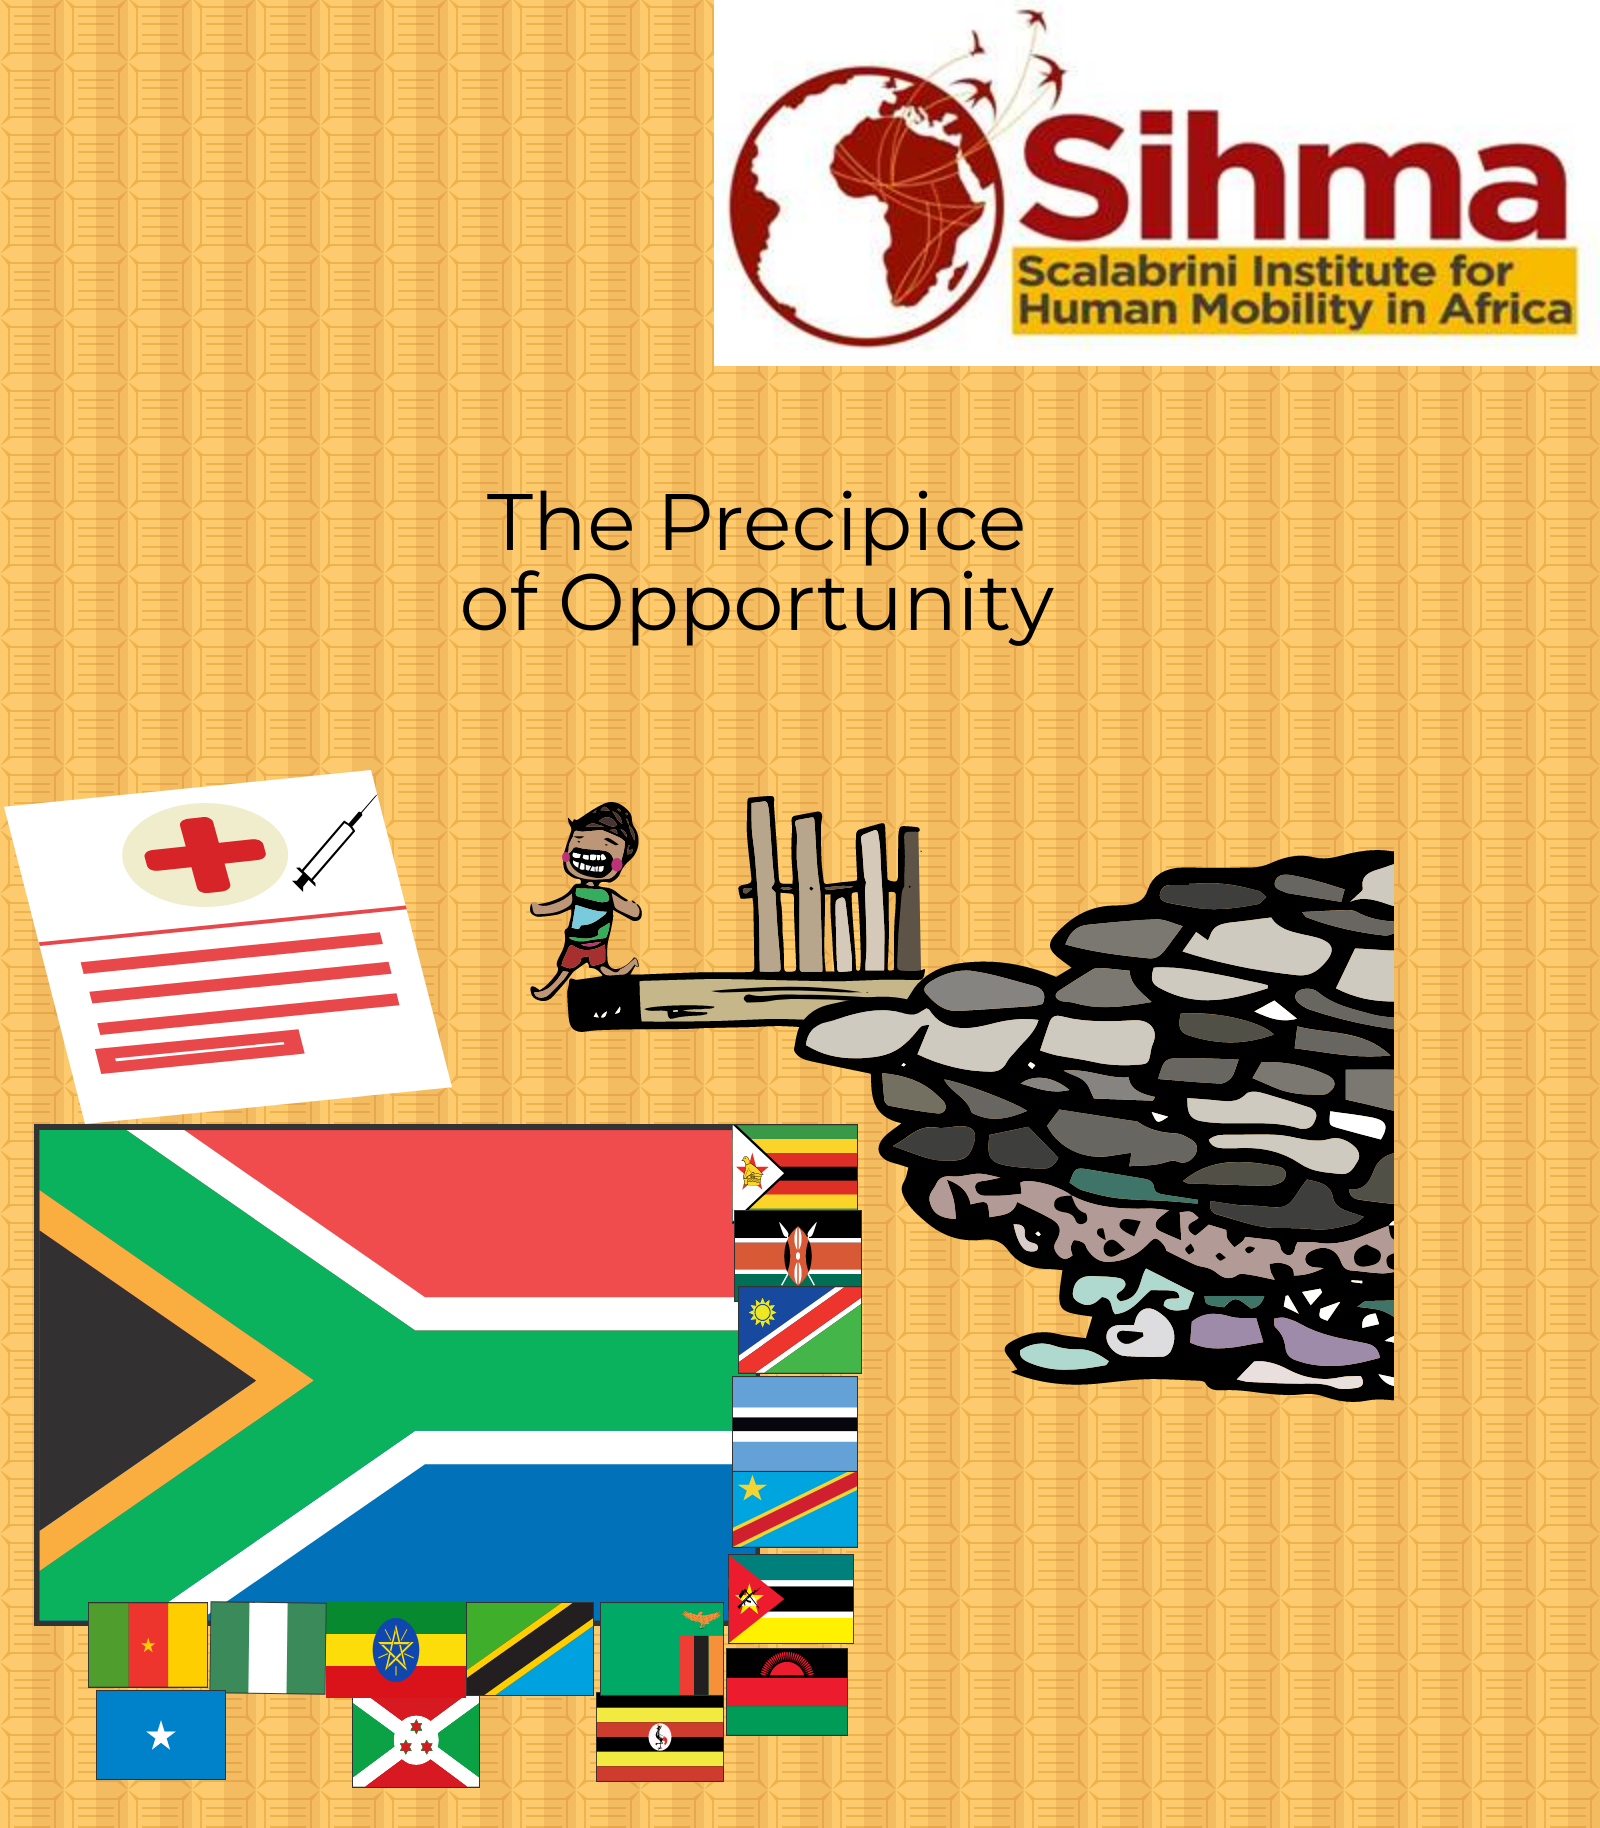 https://sihma.org.za/photos/shares/blog precipice of opportunity.png